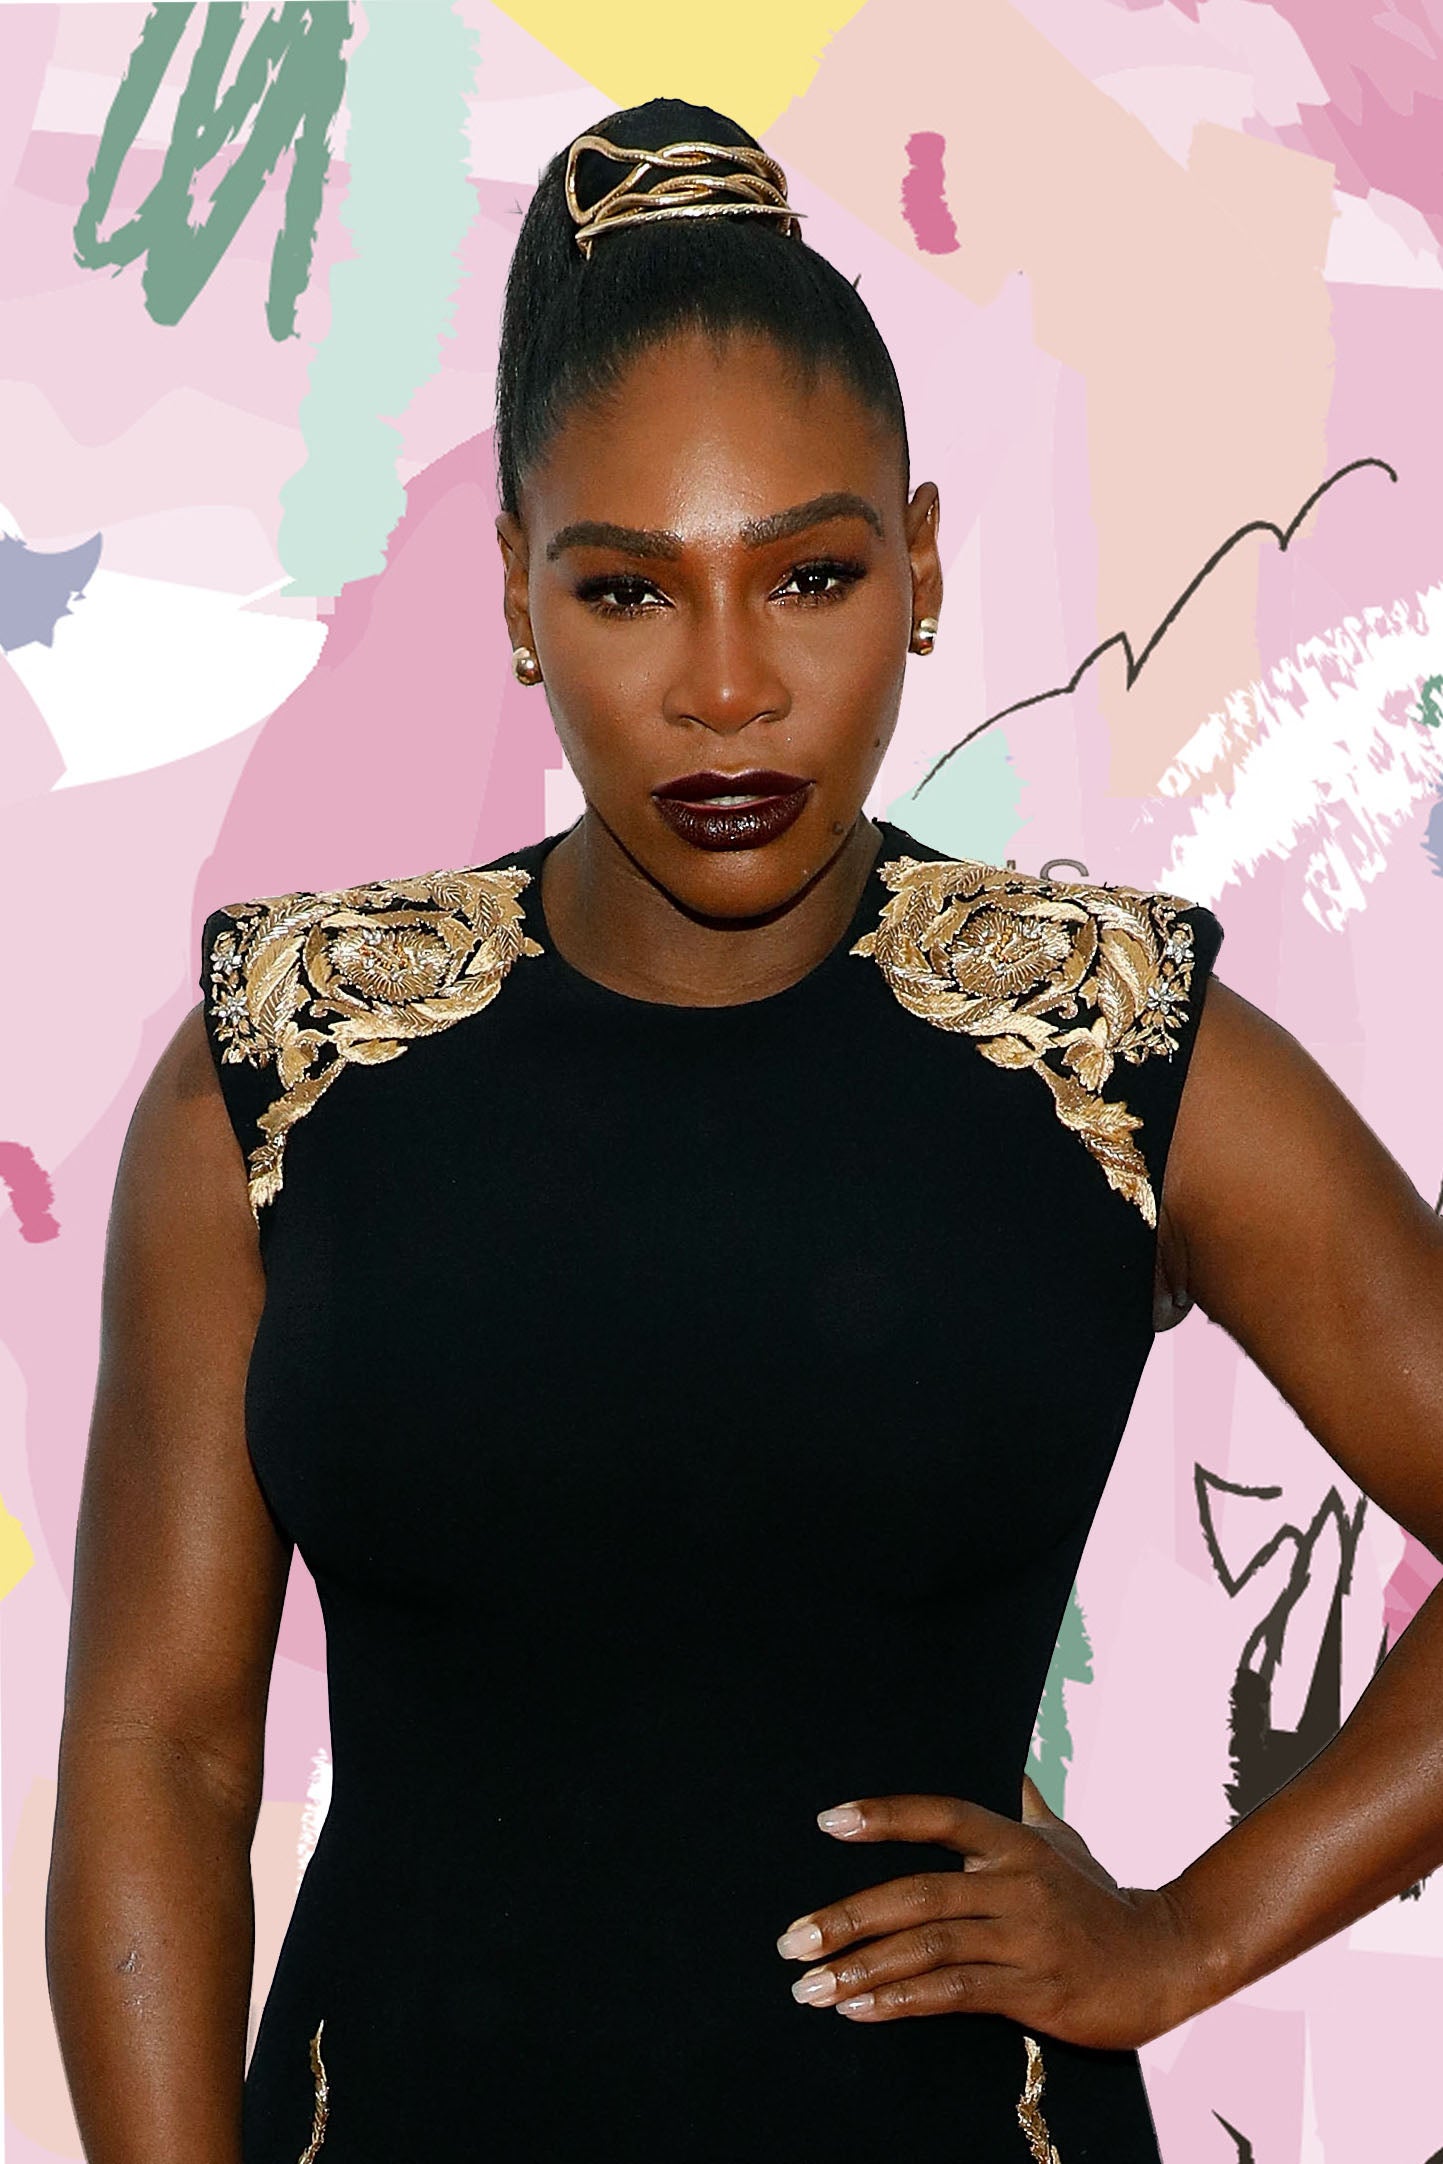 Serena Williams Will Not Compete In The Australian Open: 'I'm Not Where I Personally Want To Be'
